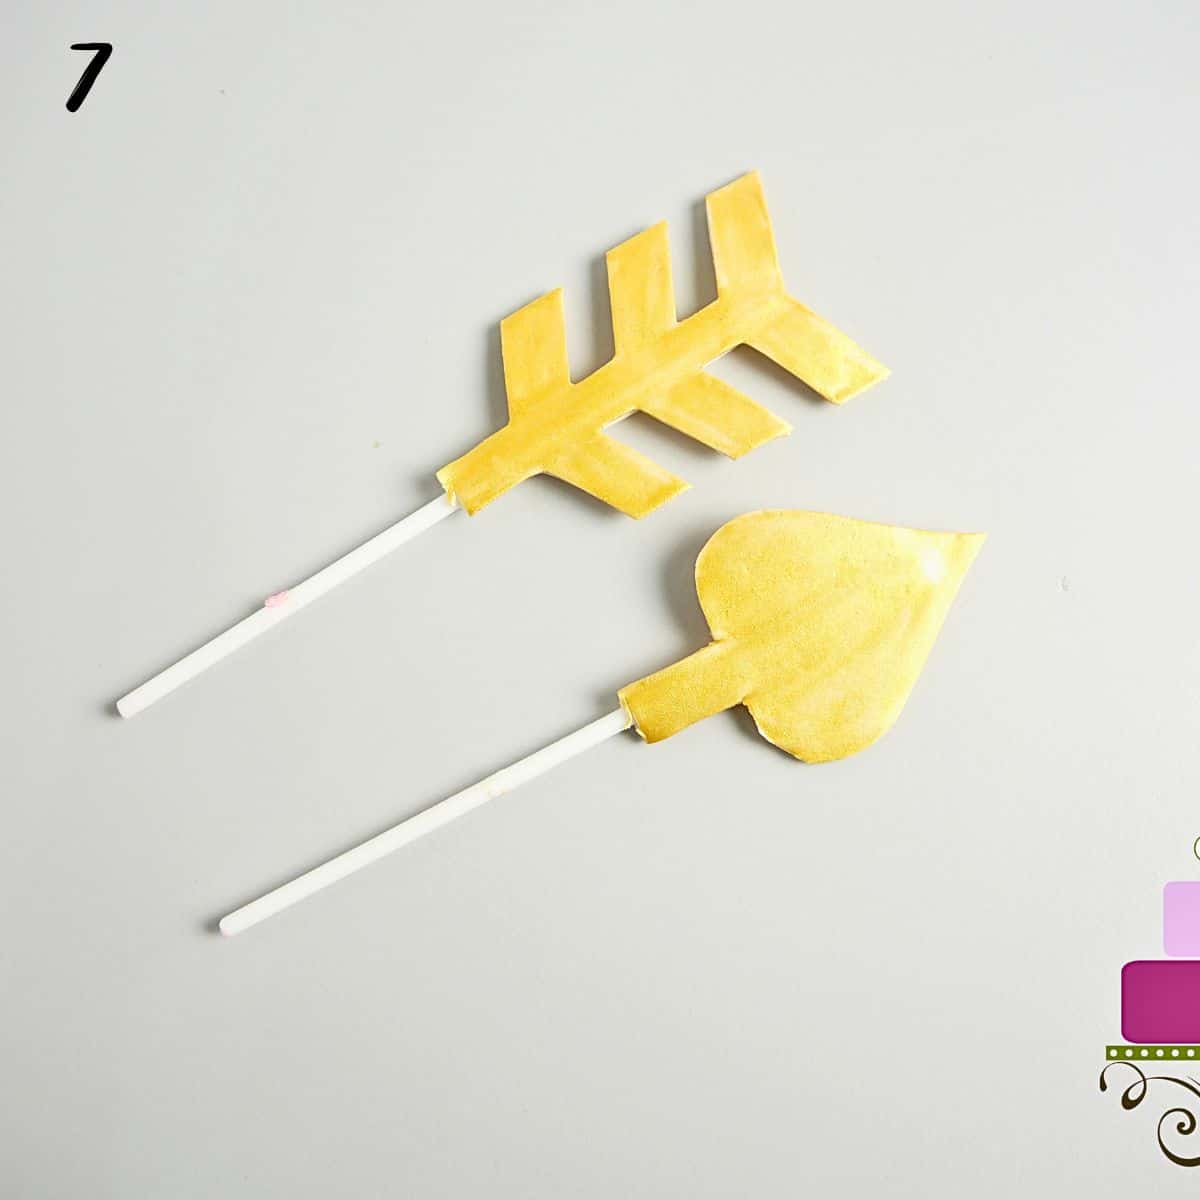 Gold arrows with lollipop sticks attached.